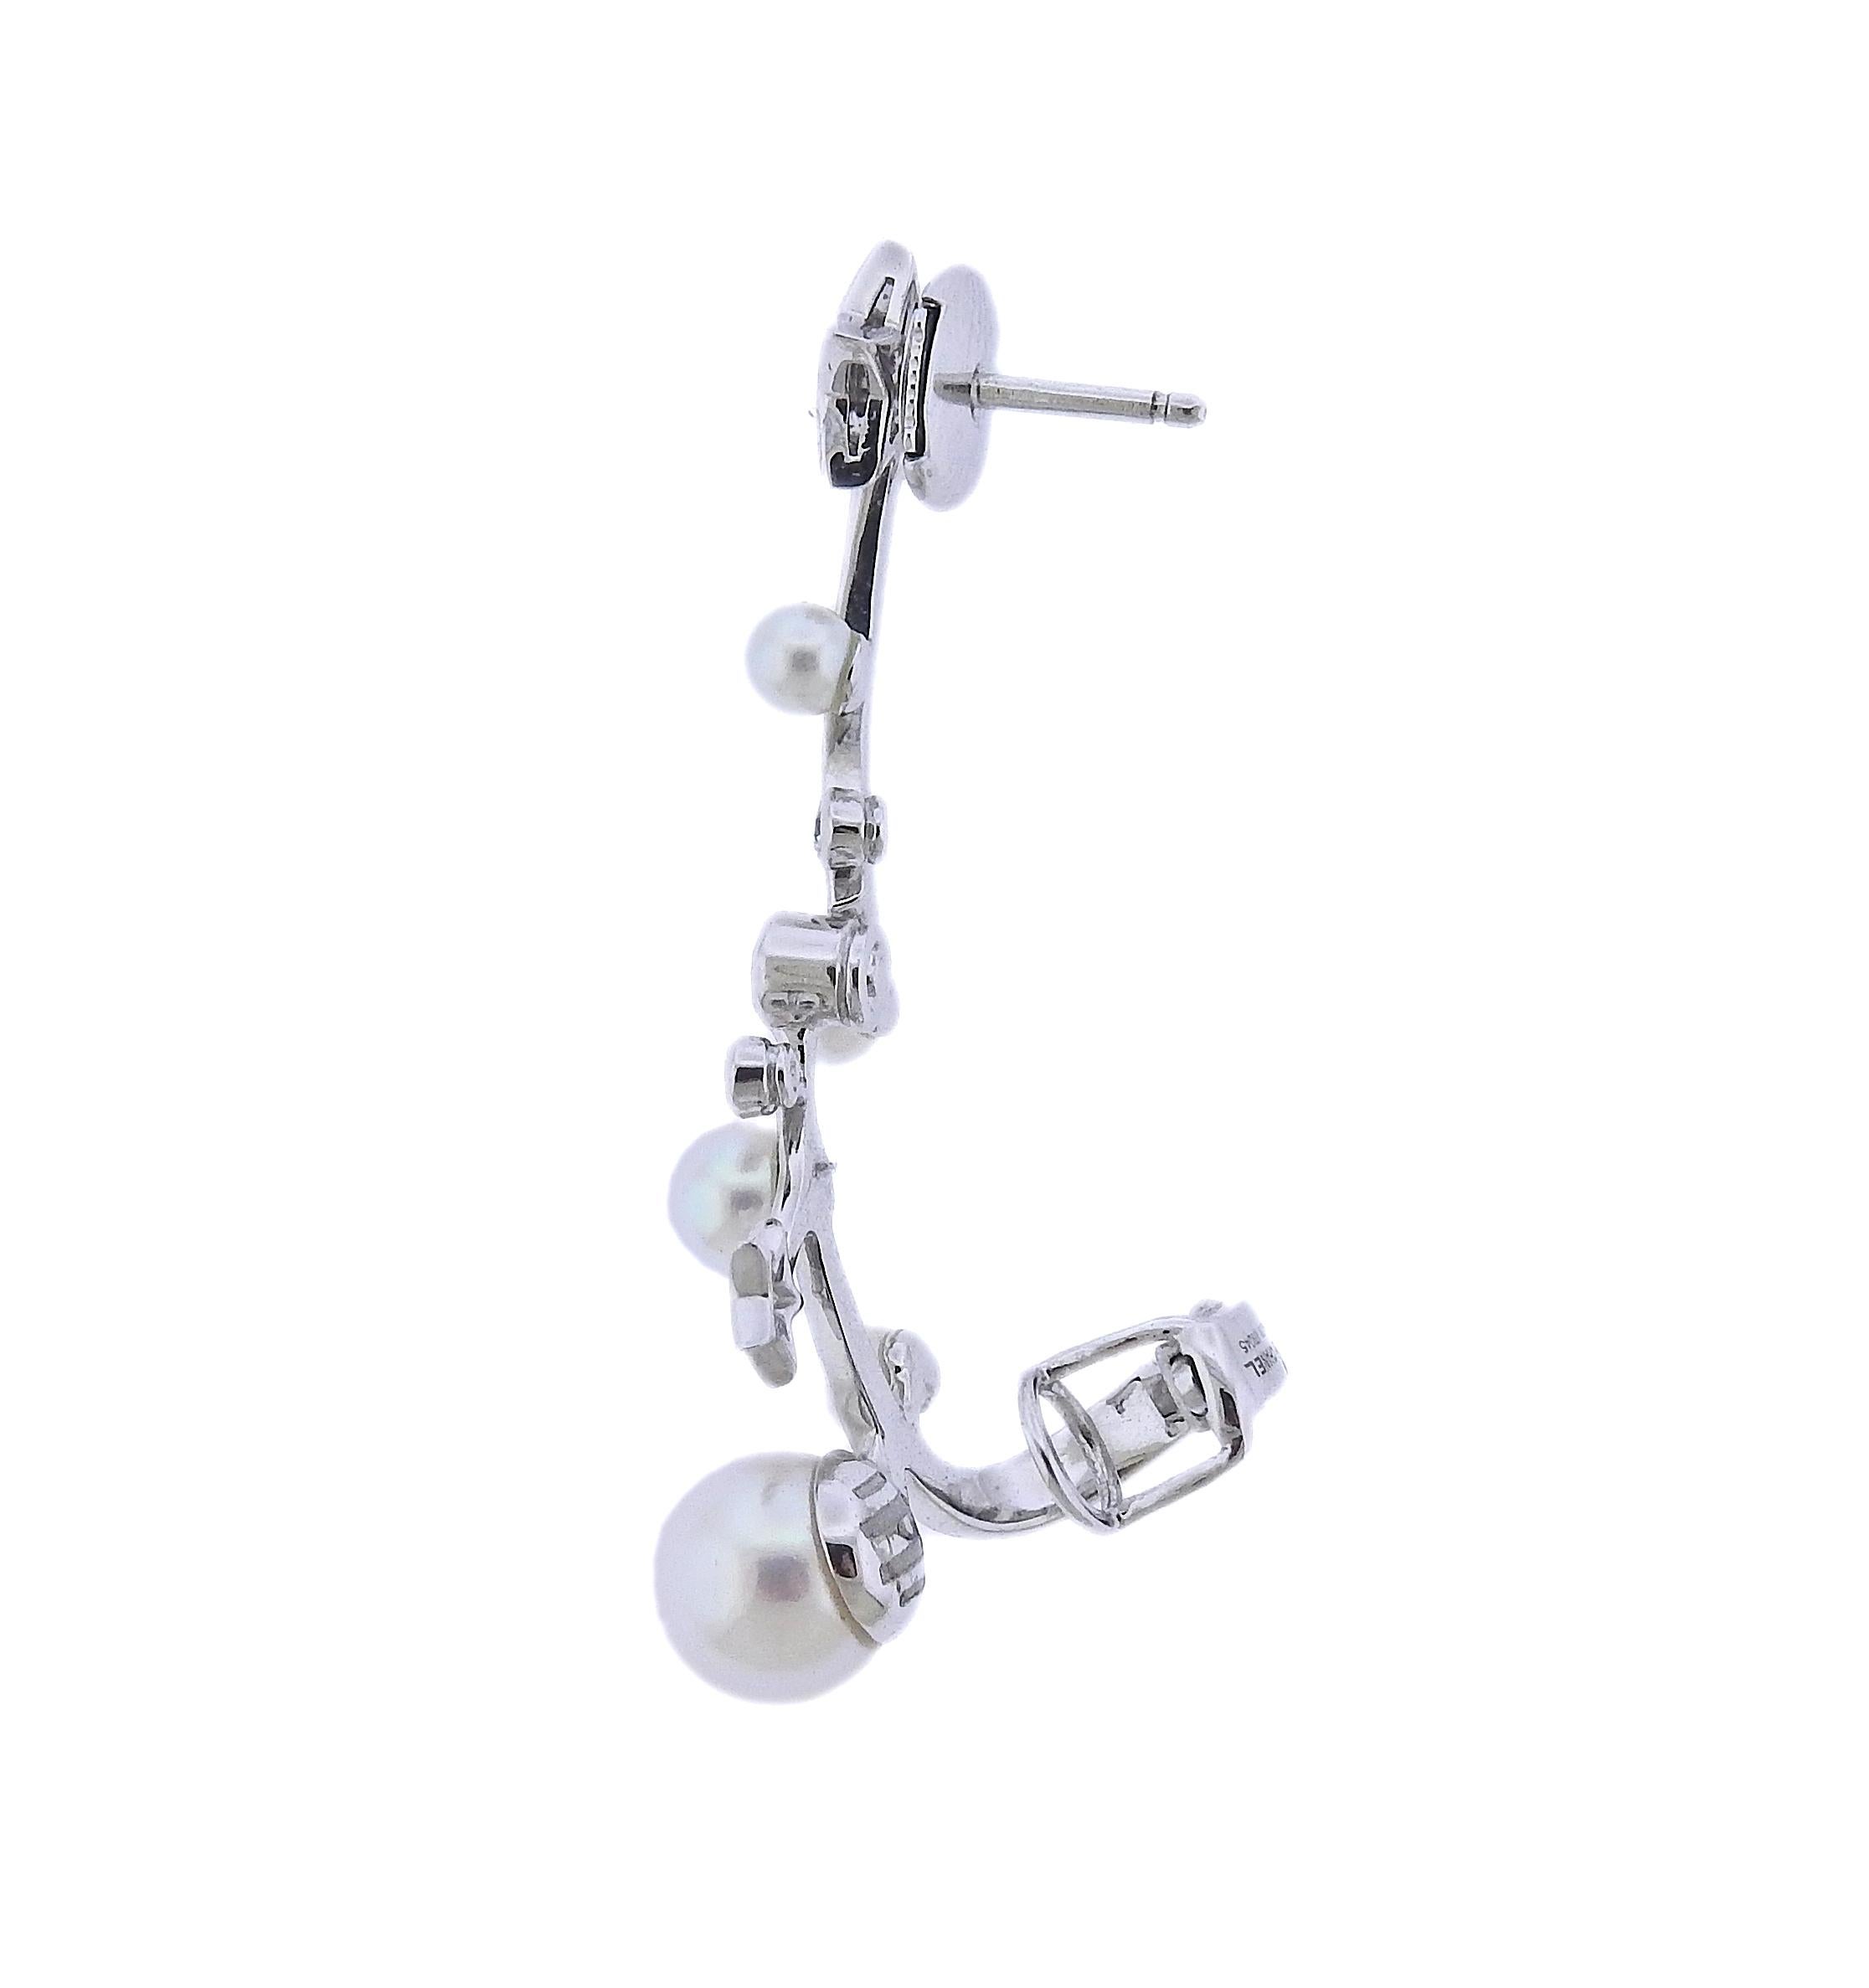 Exquisite Chanel Comete Perlee 18k gold ear cuff climber, with approx. 0.38ctw in FG/VVS diamonds and pearls. Current retail $10500. Earring measures 42mm x 15mm. Marked: Chanel, Au750, A79245.  Weight - 5 grams. 